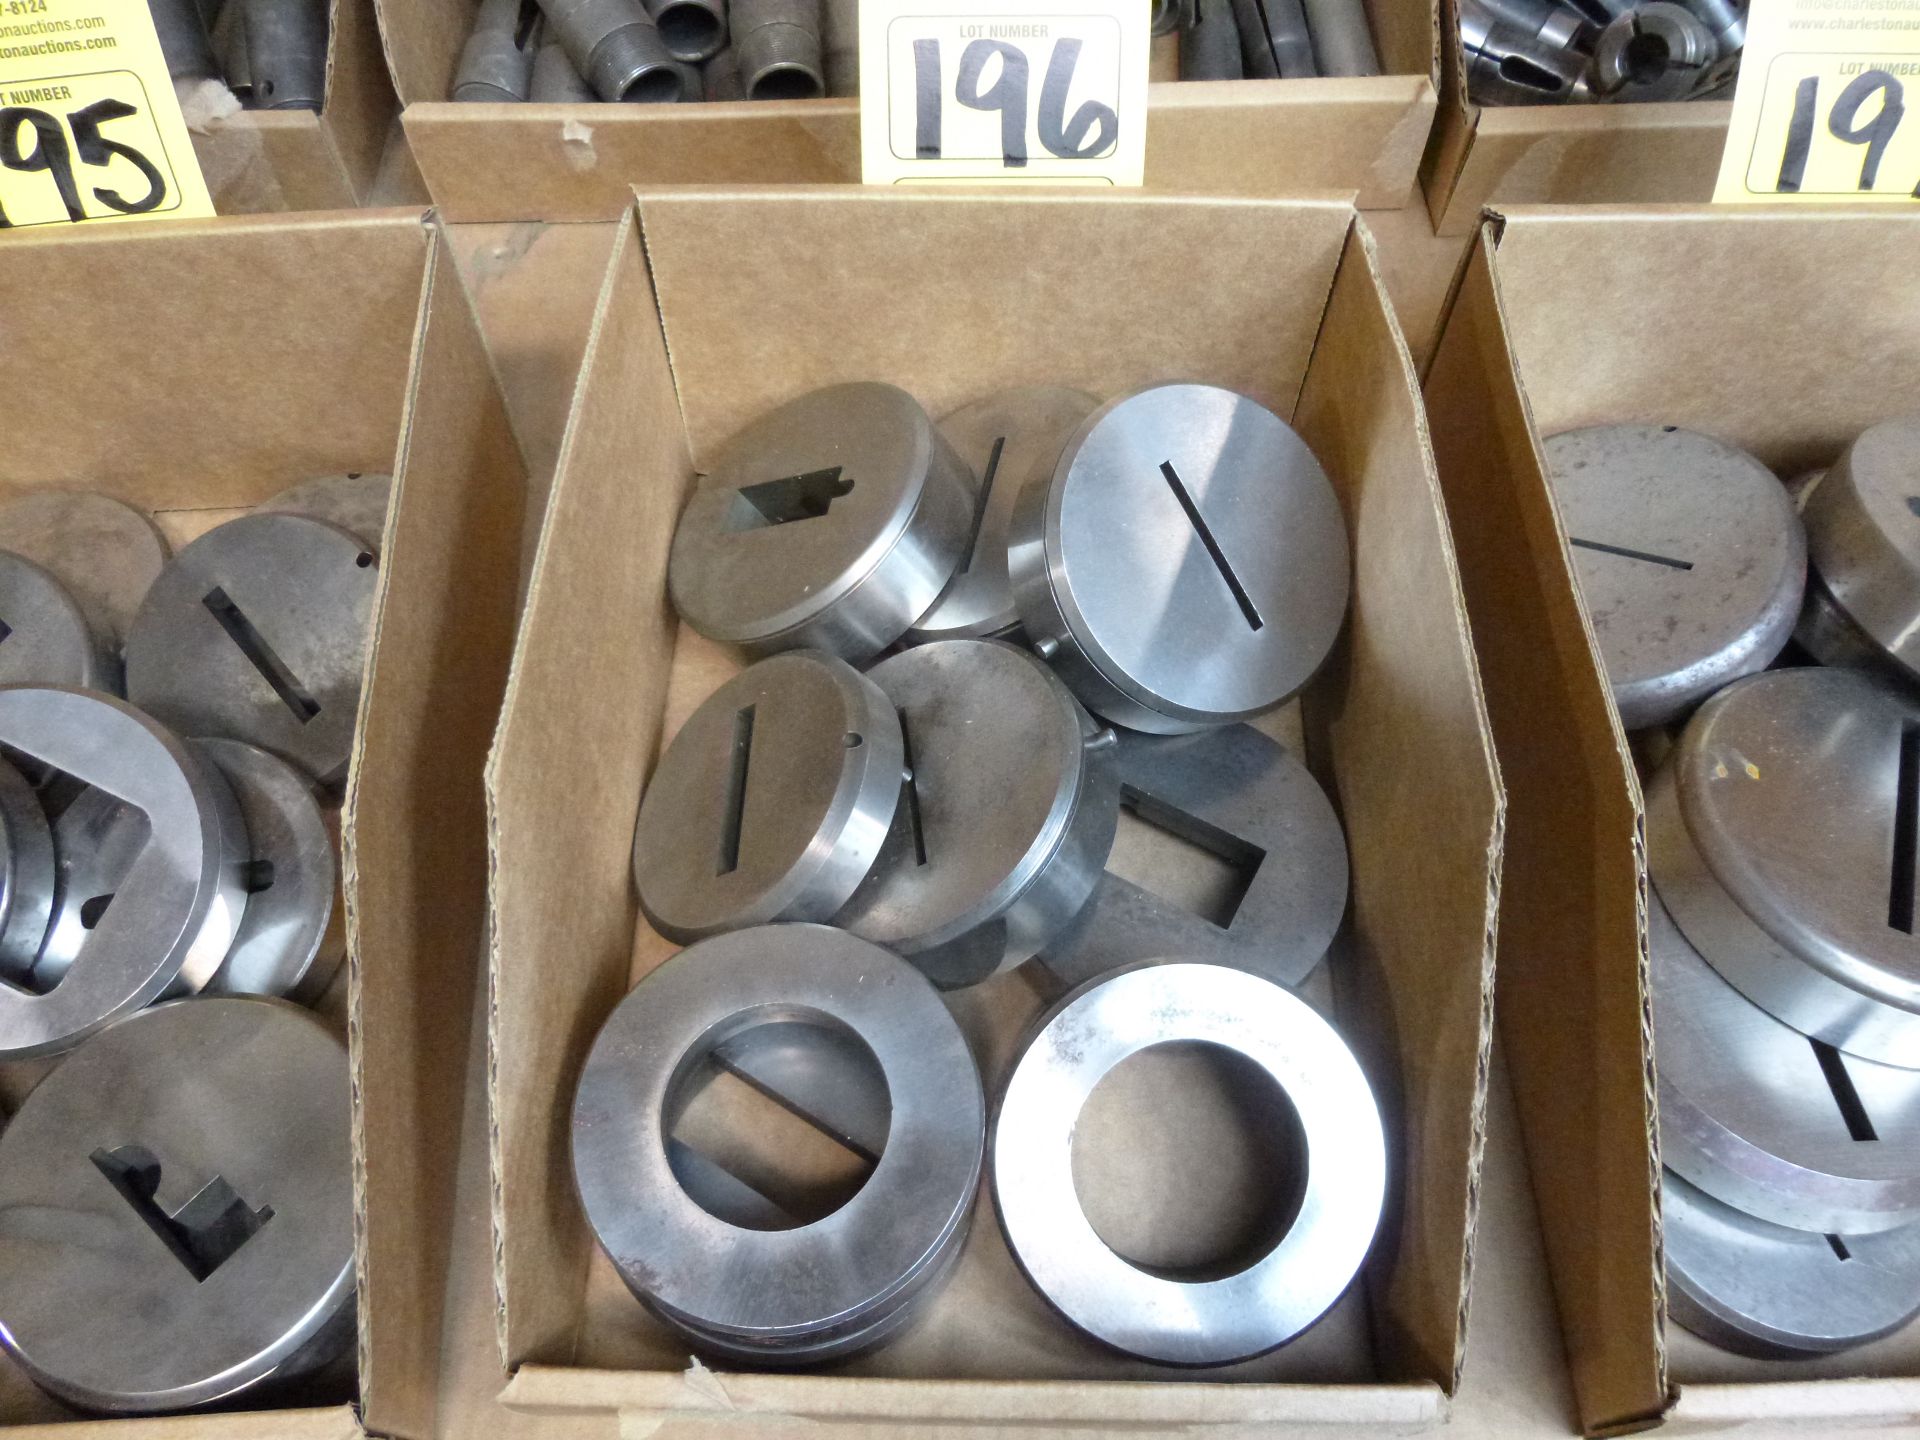 Flat of punch dies Shipping can be prepared for either ground package or LTL for this lot. Call or